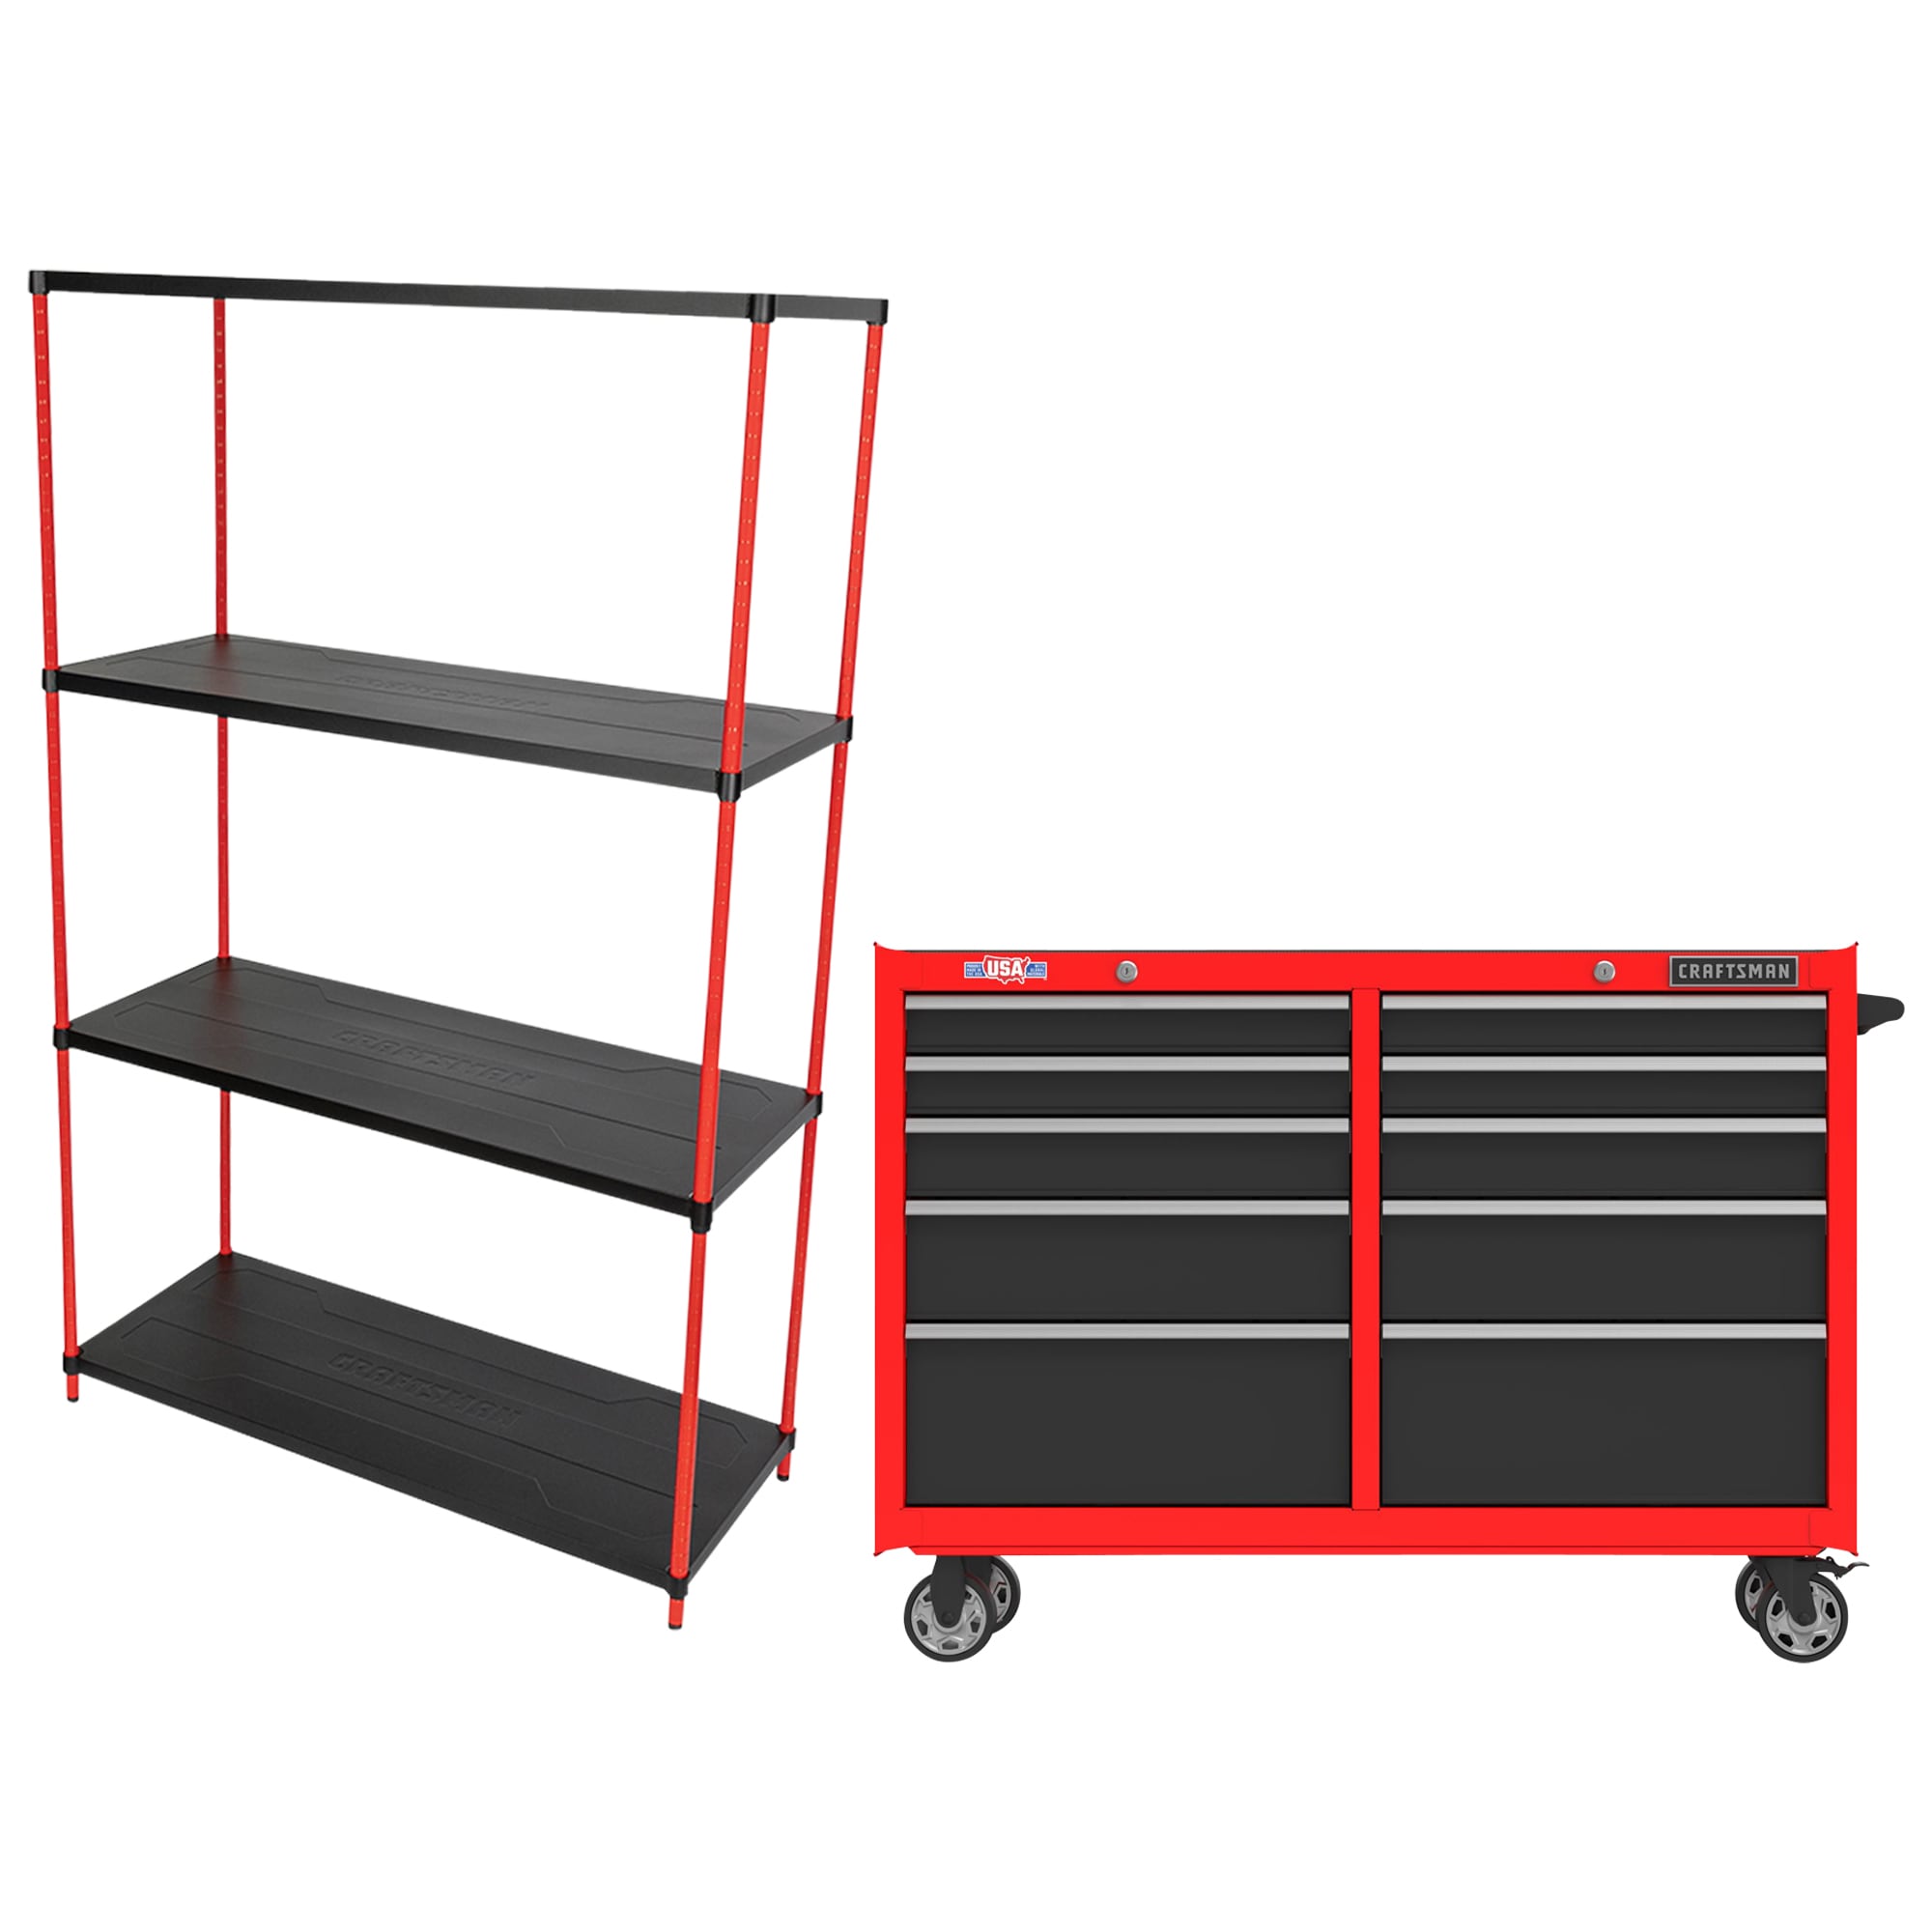 CRAFTSMAN Steel 4-Tier Utility Shelving Unit (45-in W x 18-in D x 72-in H) & 2000 52-In 10-Drawer Cabinet - Red